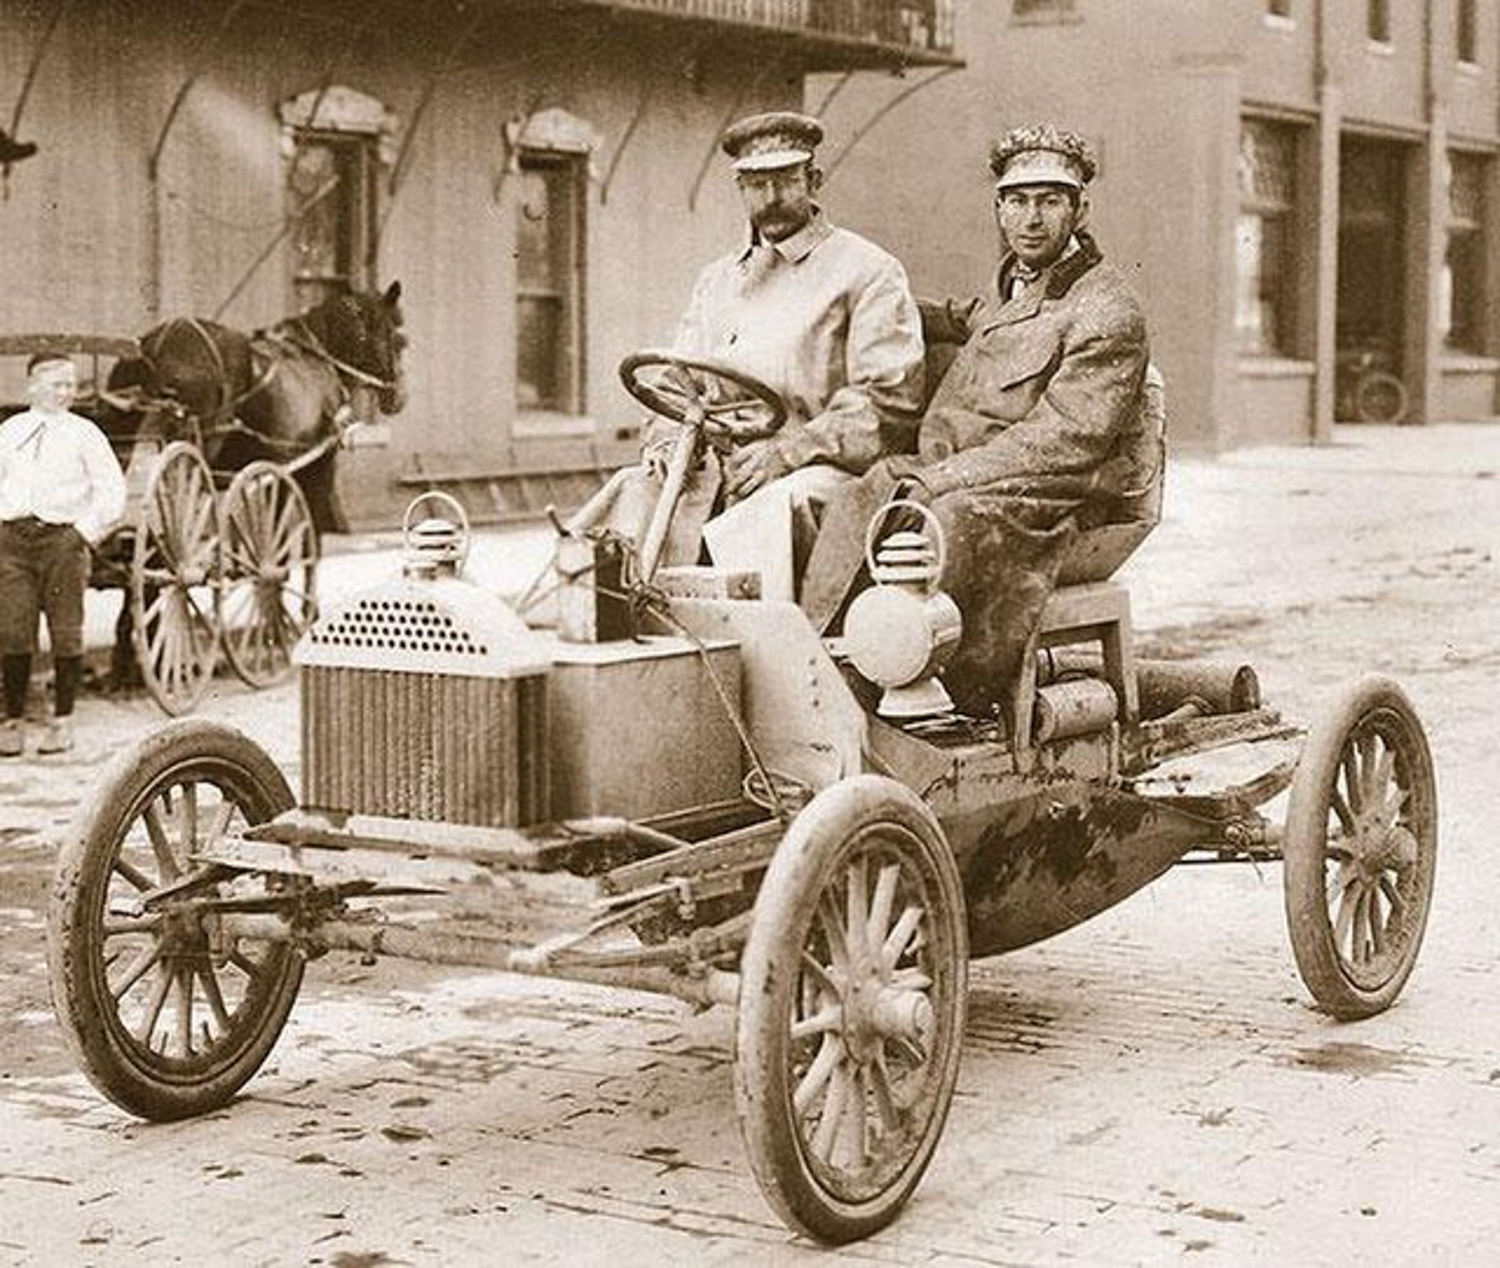 Walter Marr and Buick's son Tom test driving the Model B 